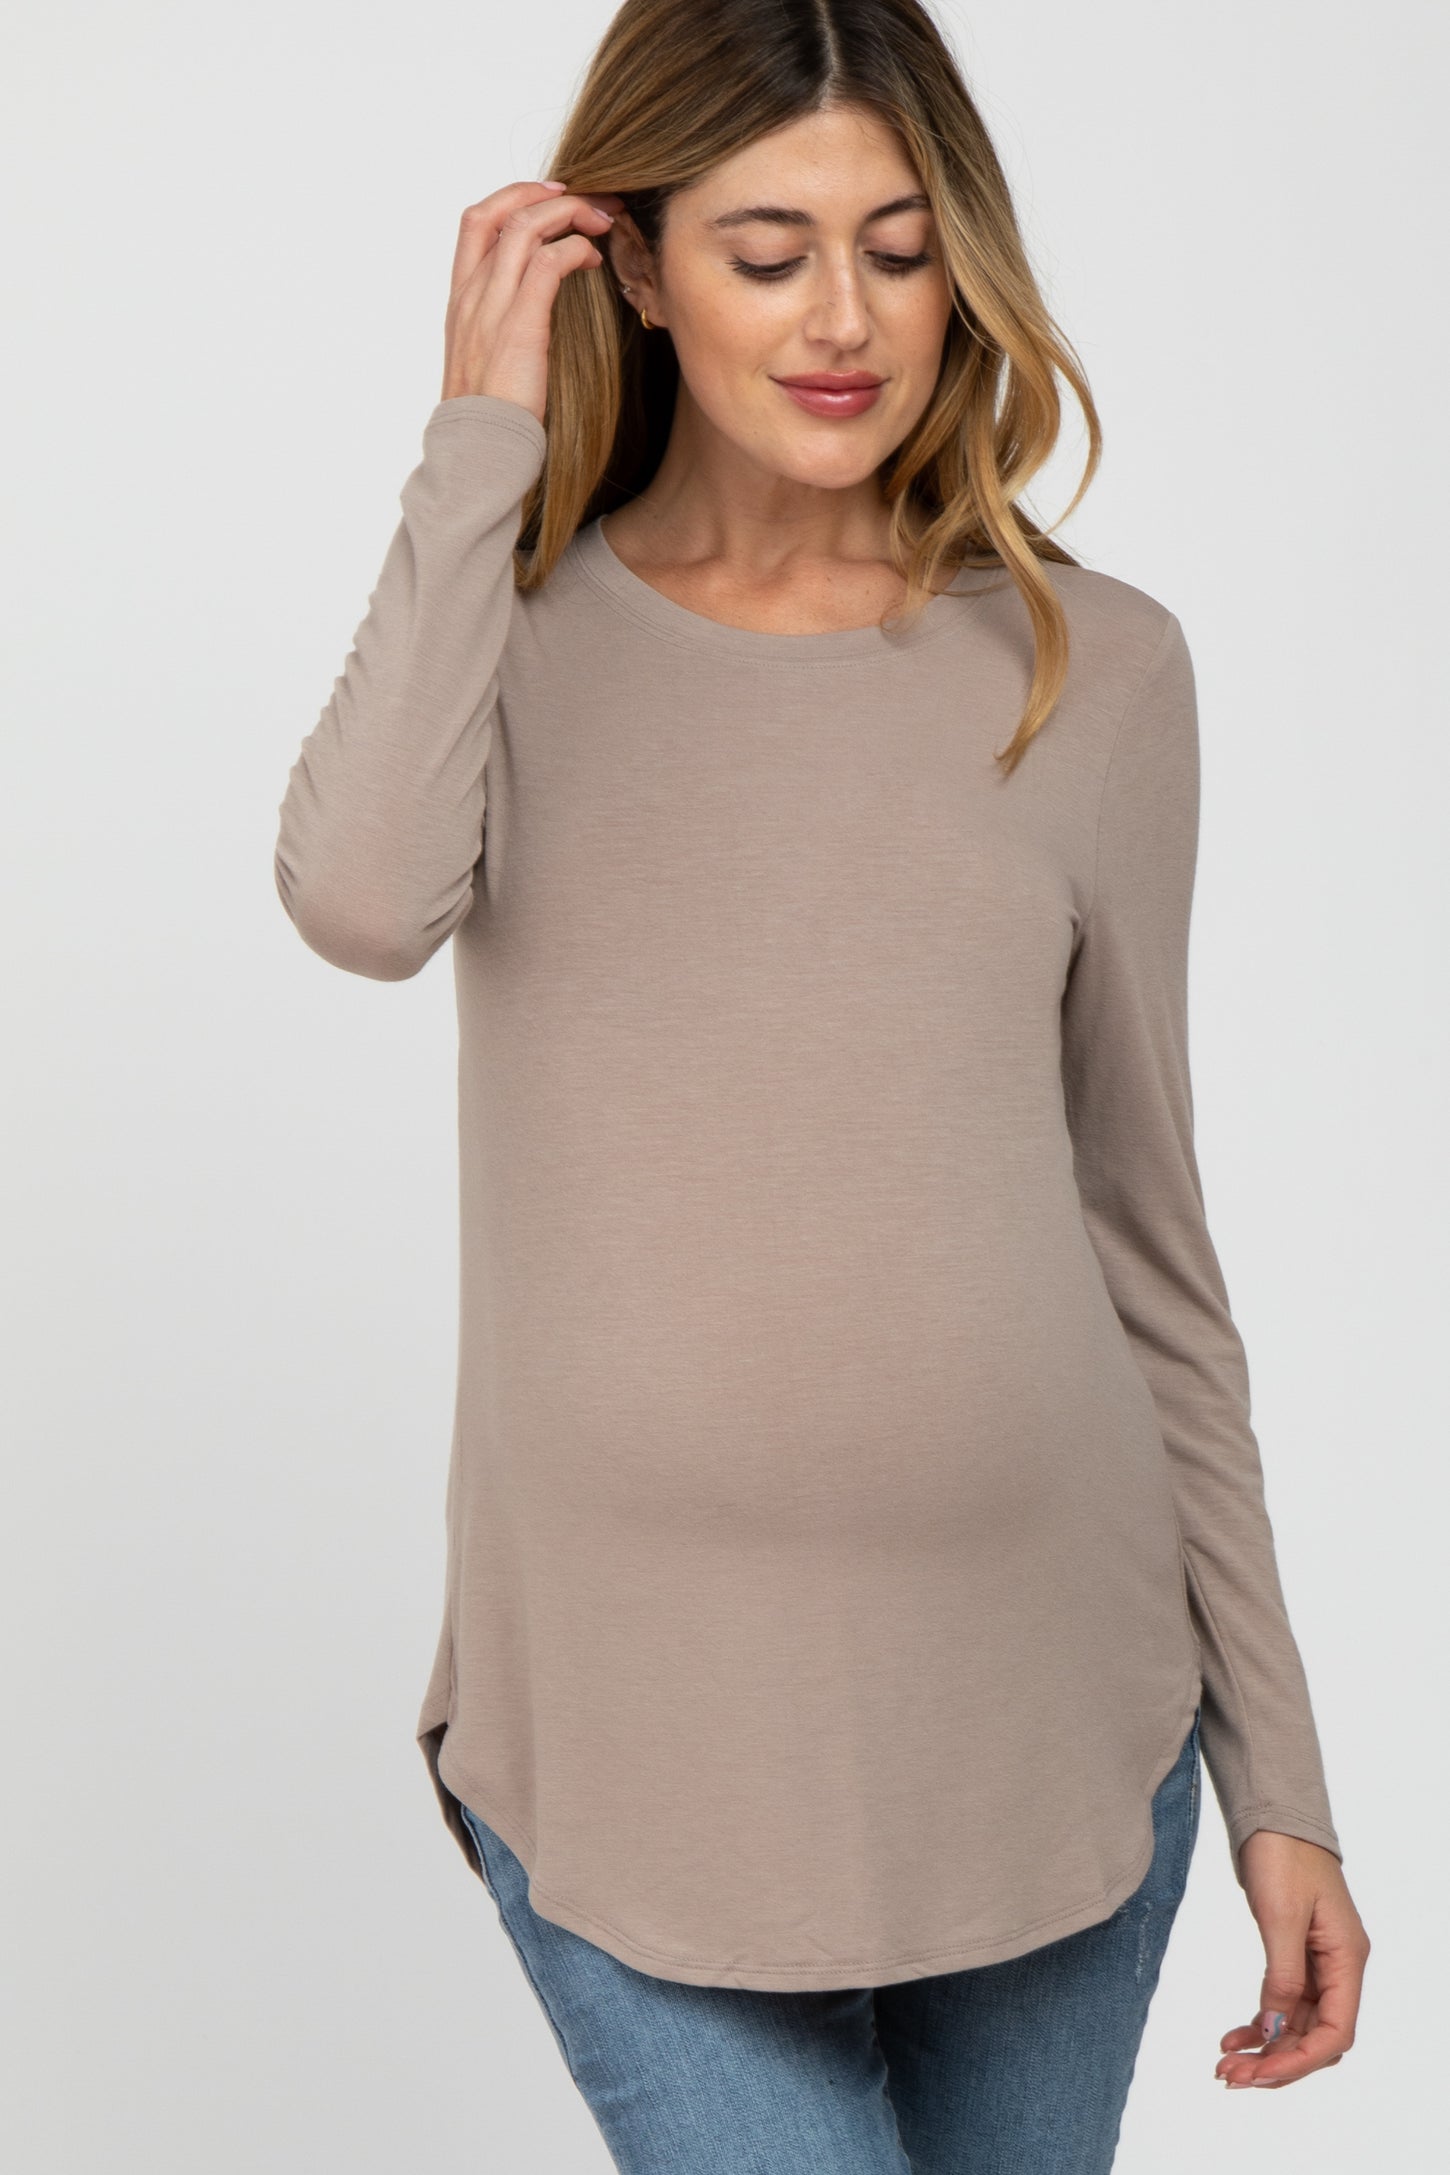 Taupe Basic Long Sleeve Maternity Top